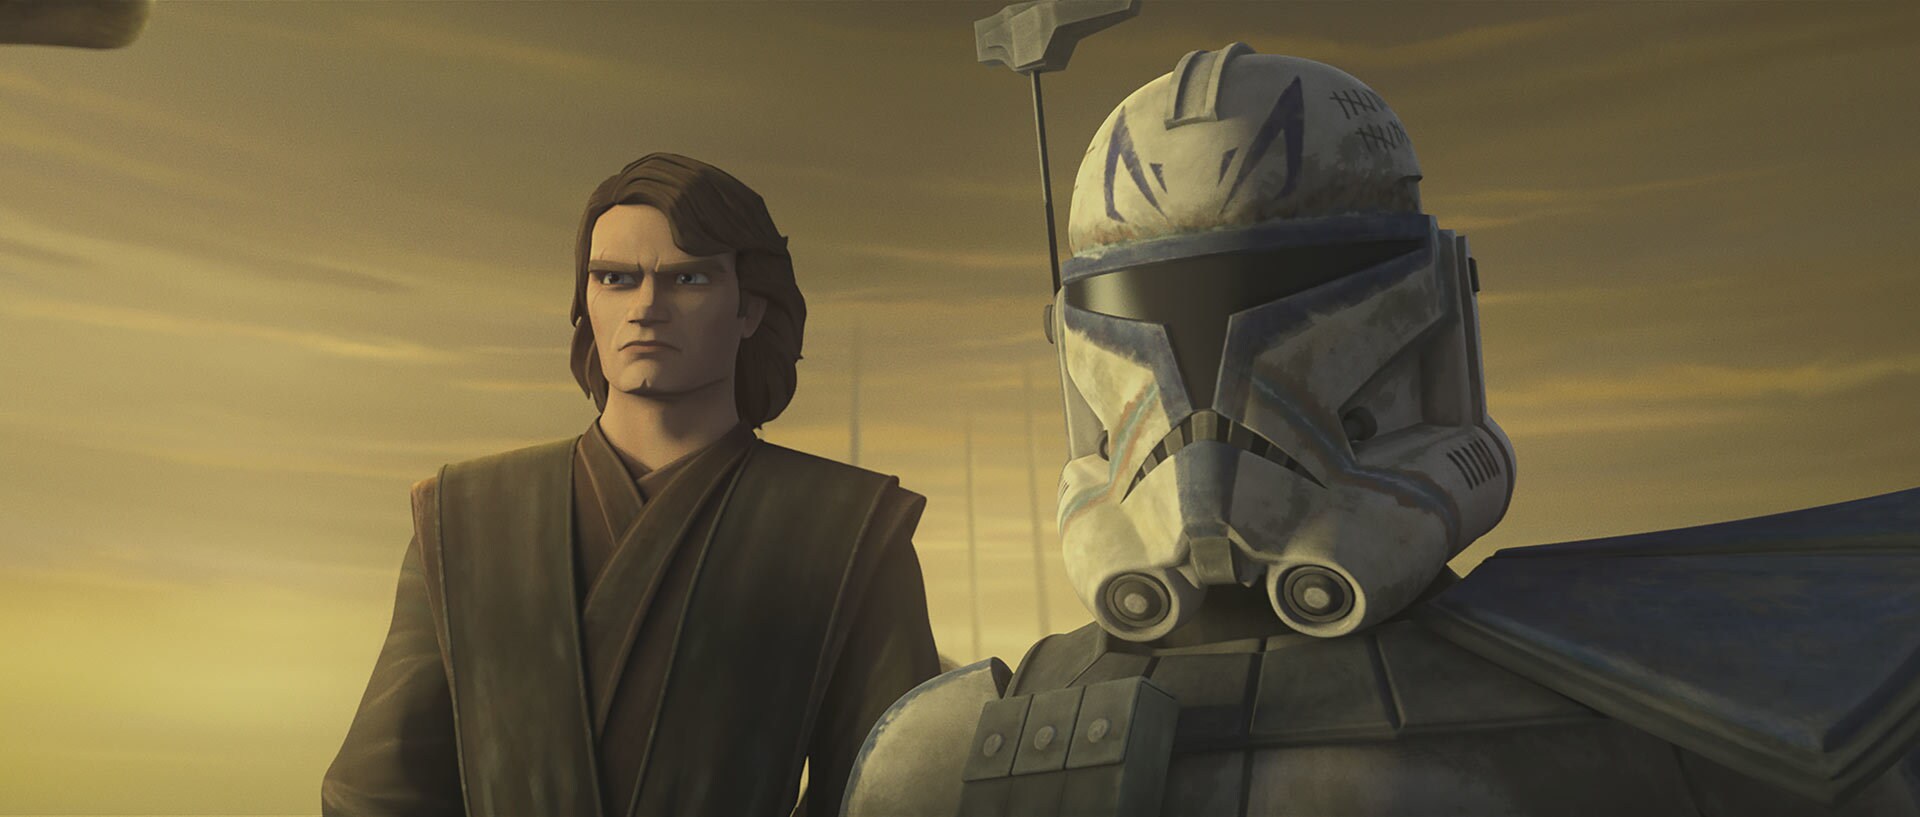 Though Anakin understands what Rex is going though, he implores his friend to prepare himself for...